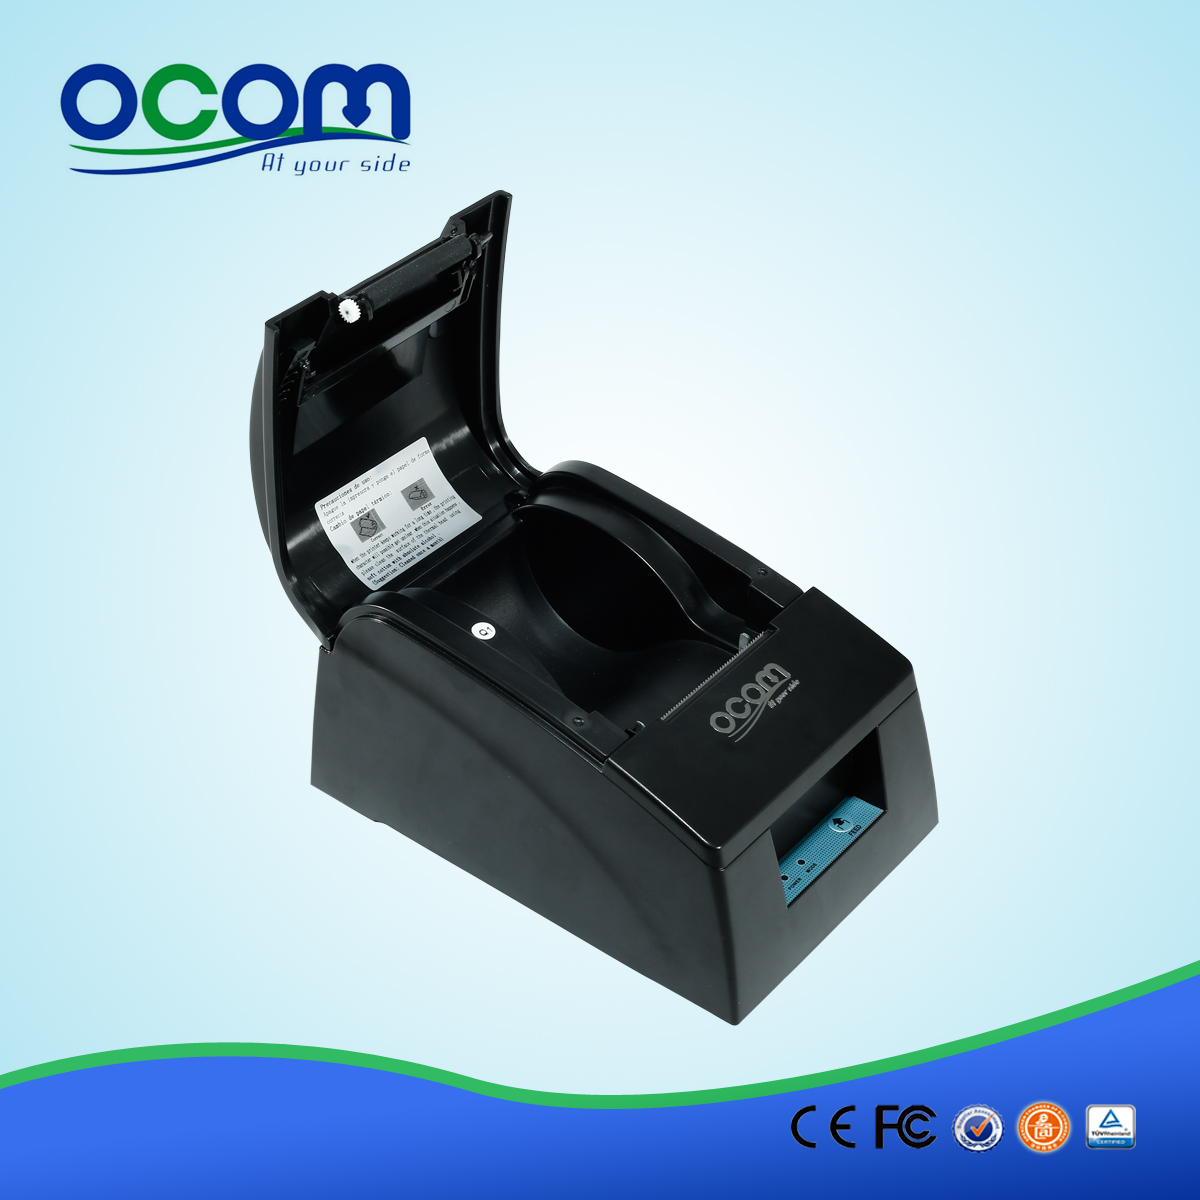 58mm Android paragon termiczna printer-- OCPP-586